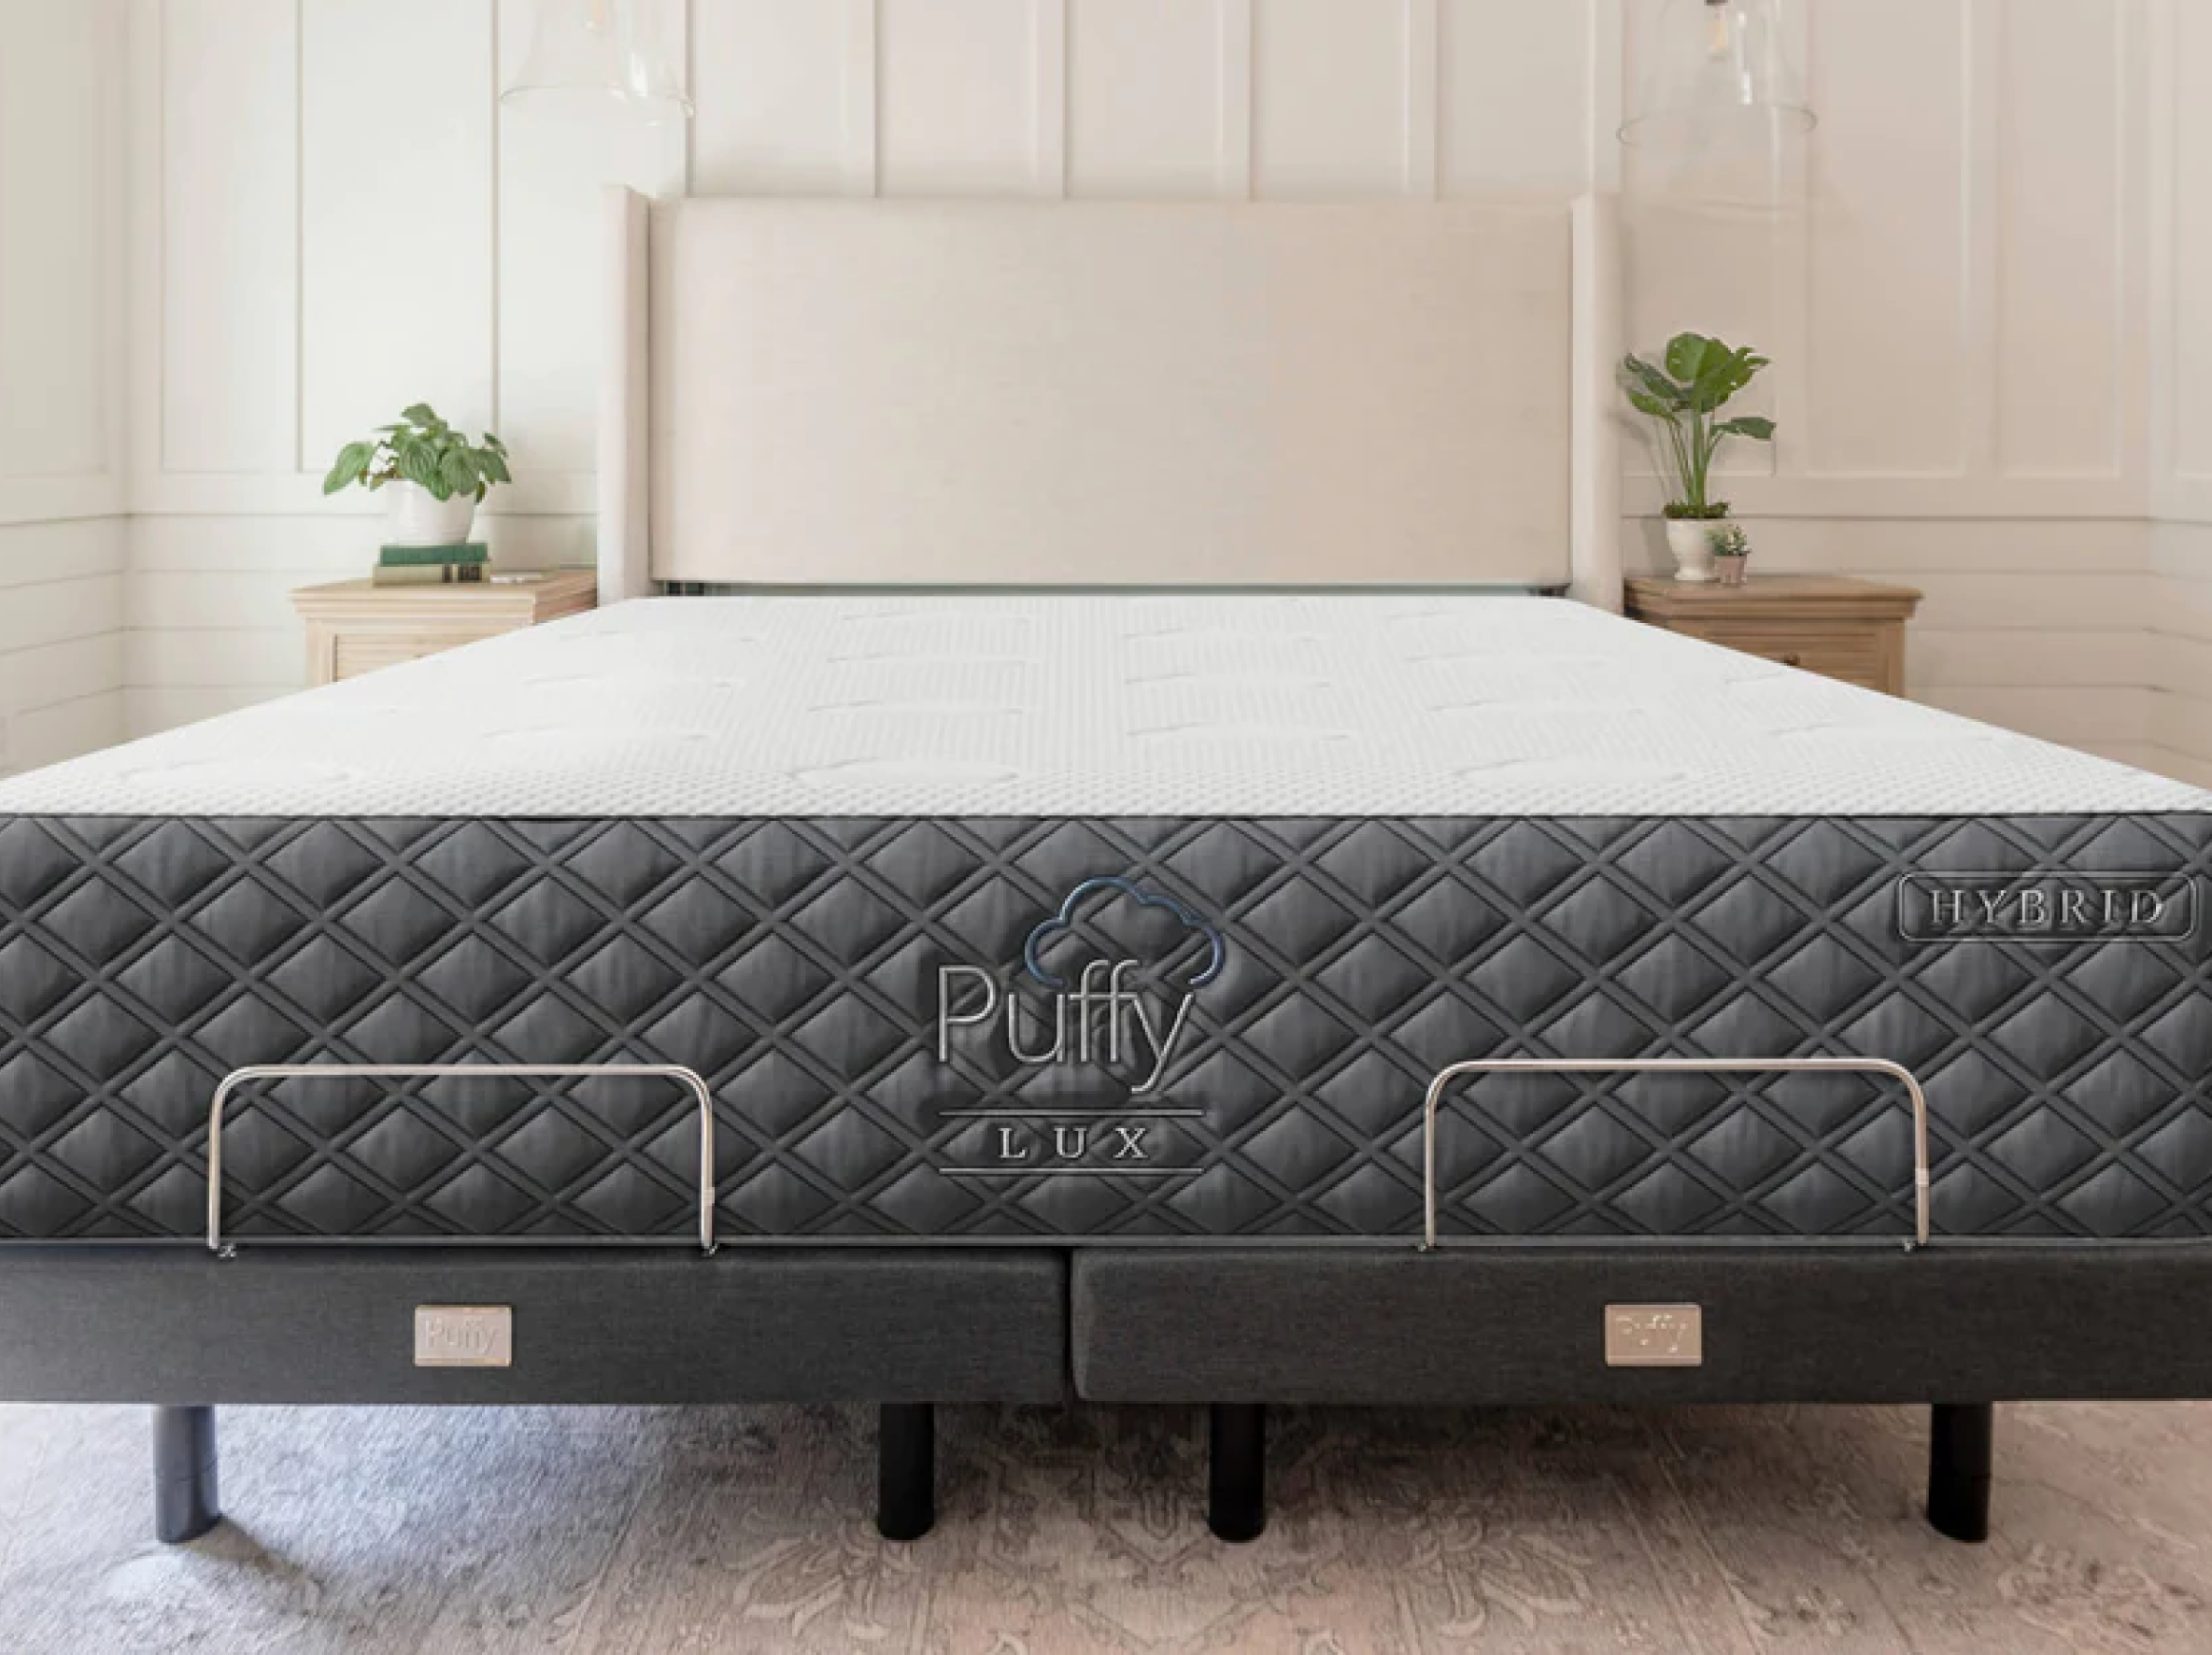 Official Puffy® Adjustable Base | Luxury Base for Your Mattress